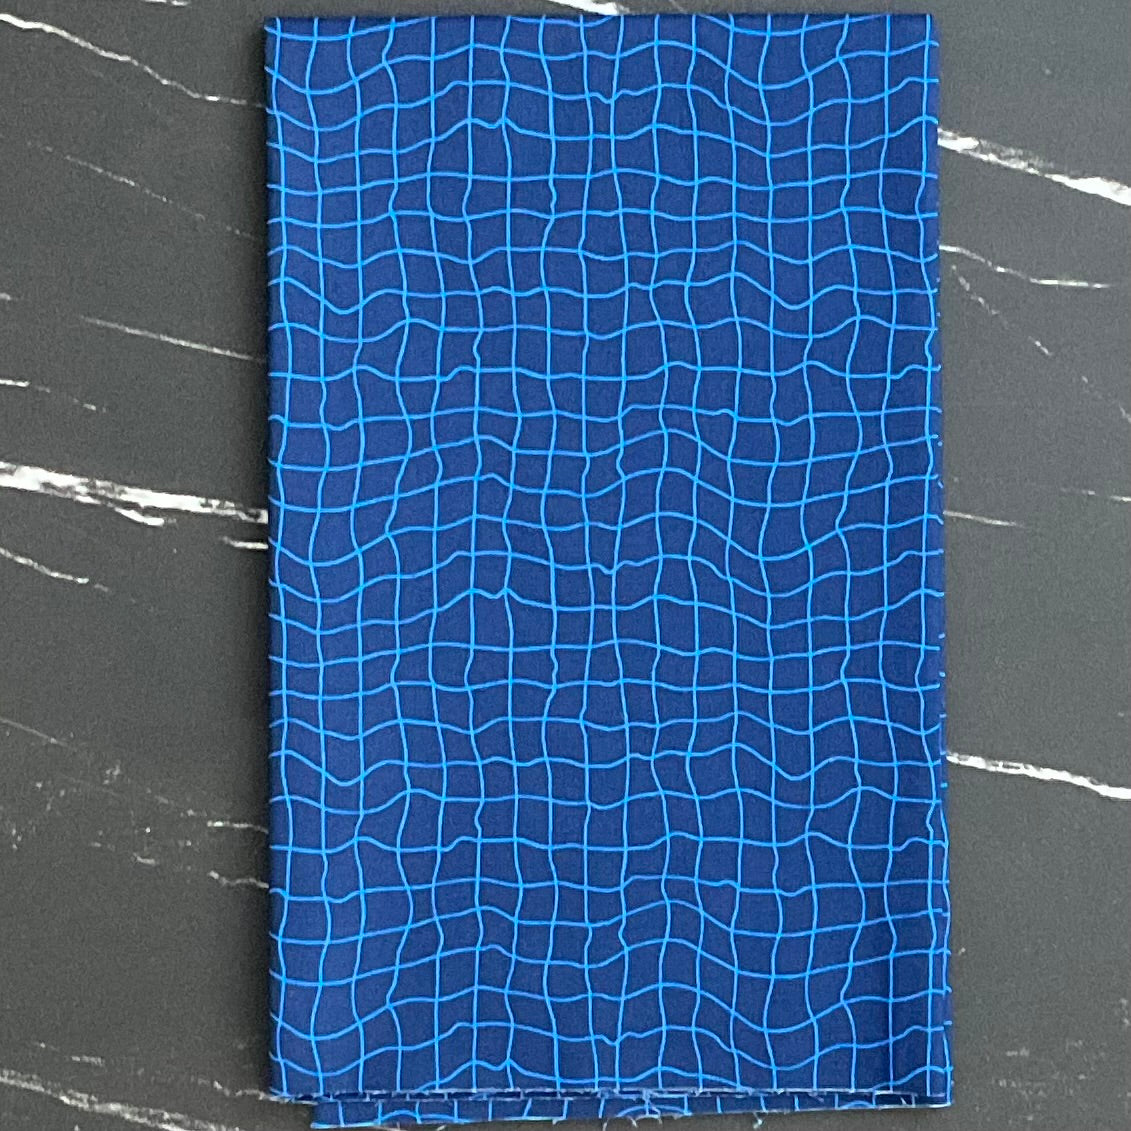 Water by Ruby Star Collaborative : Pool Tiles - Navy RS5131 17